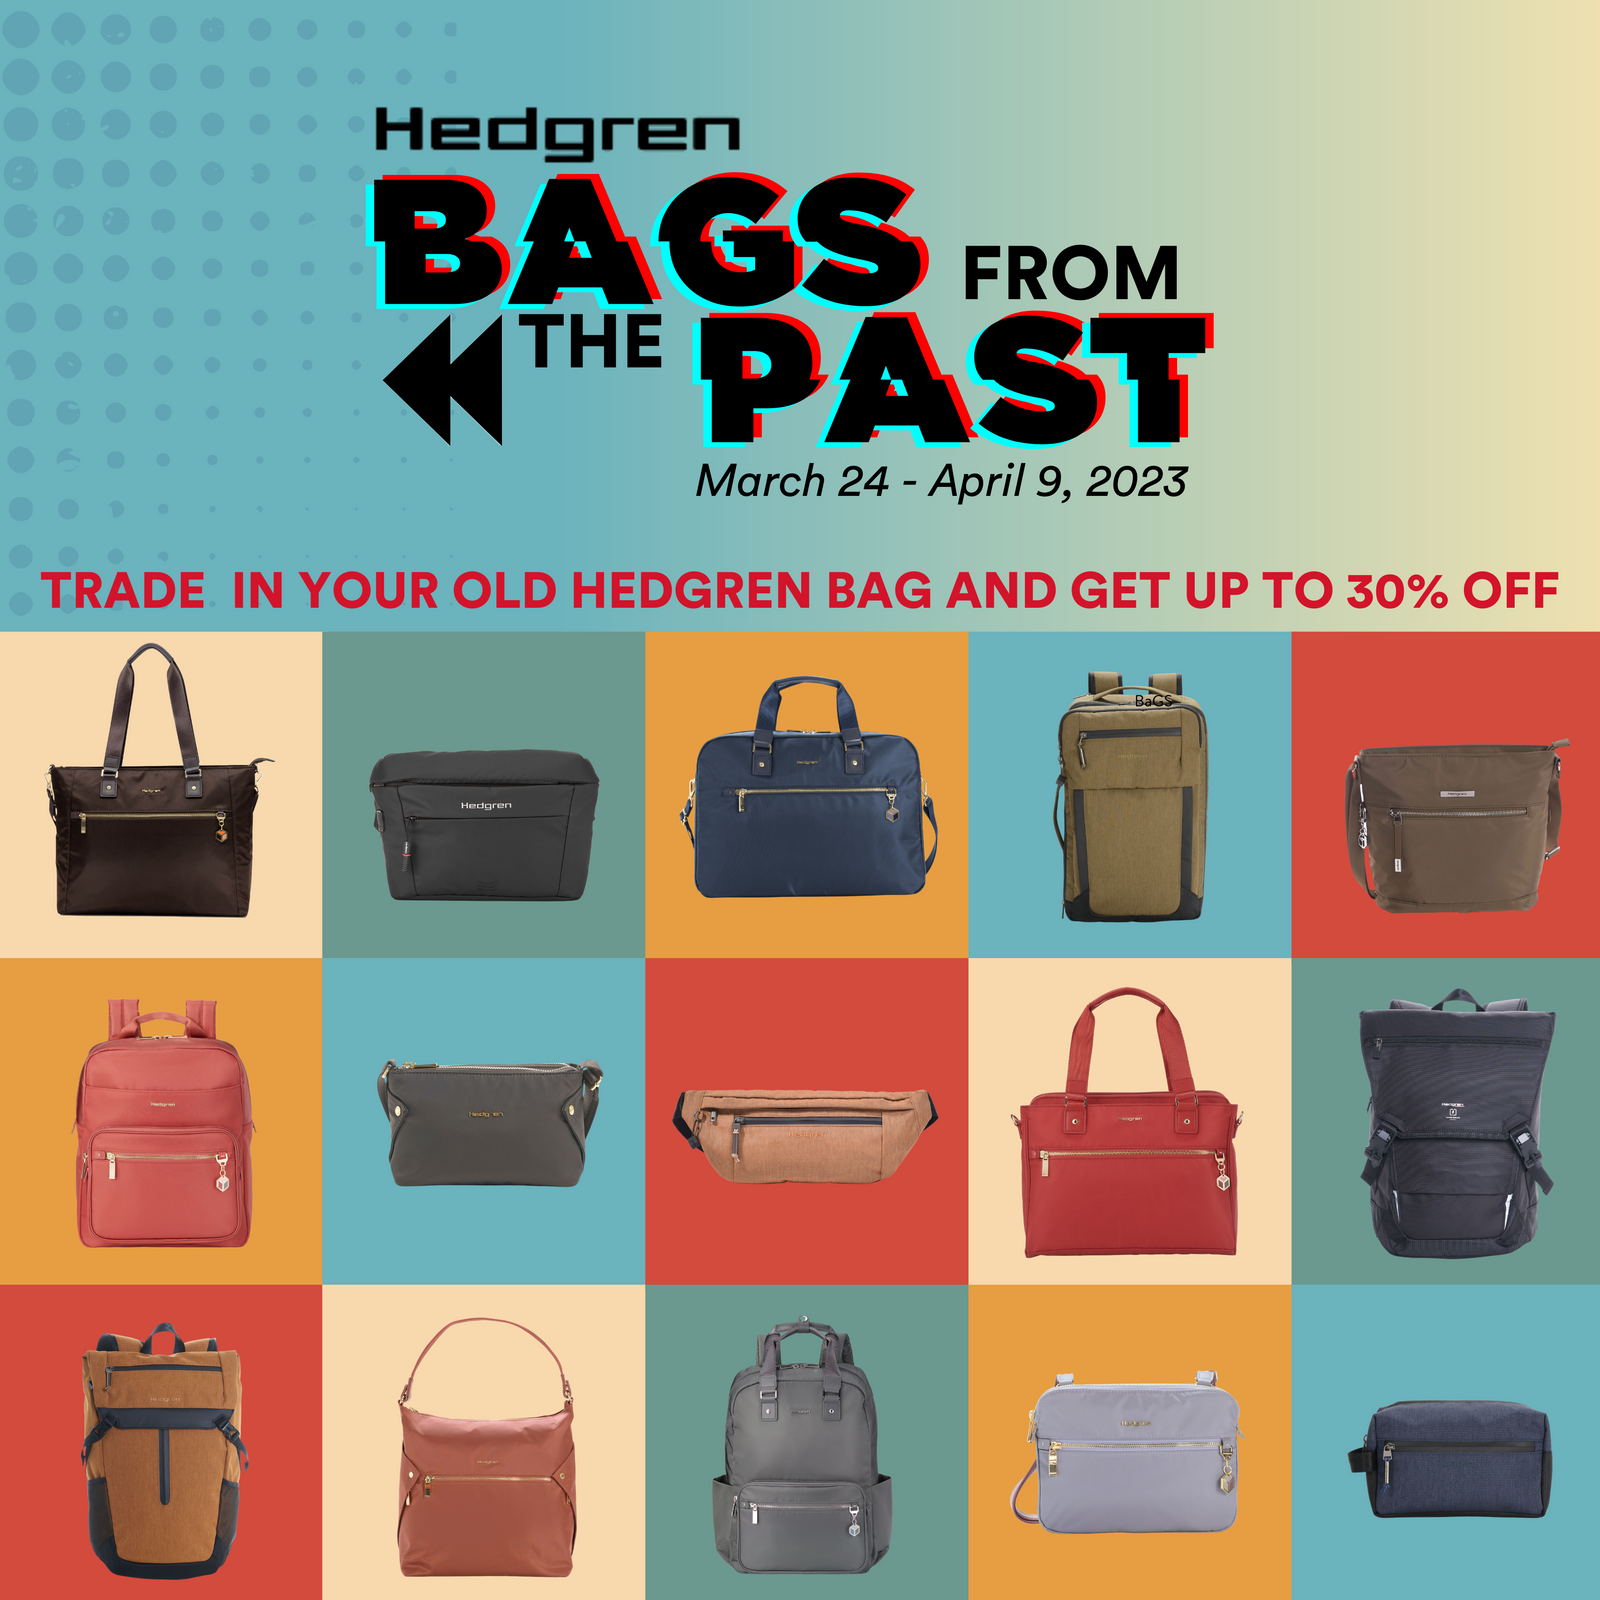 HEDGREN BAGS FROM THE PAST TRADE IN